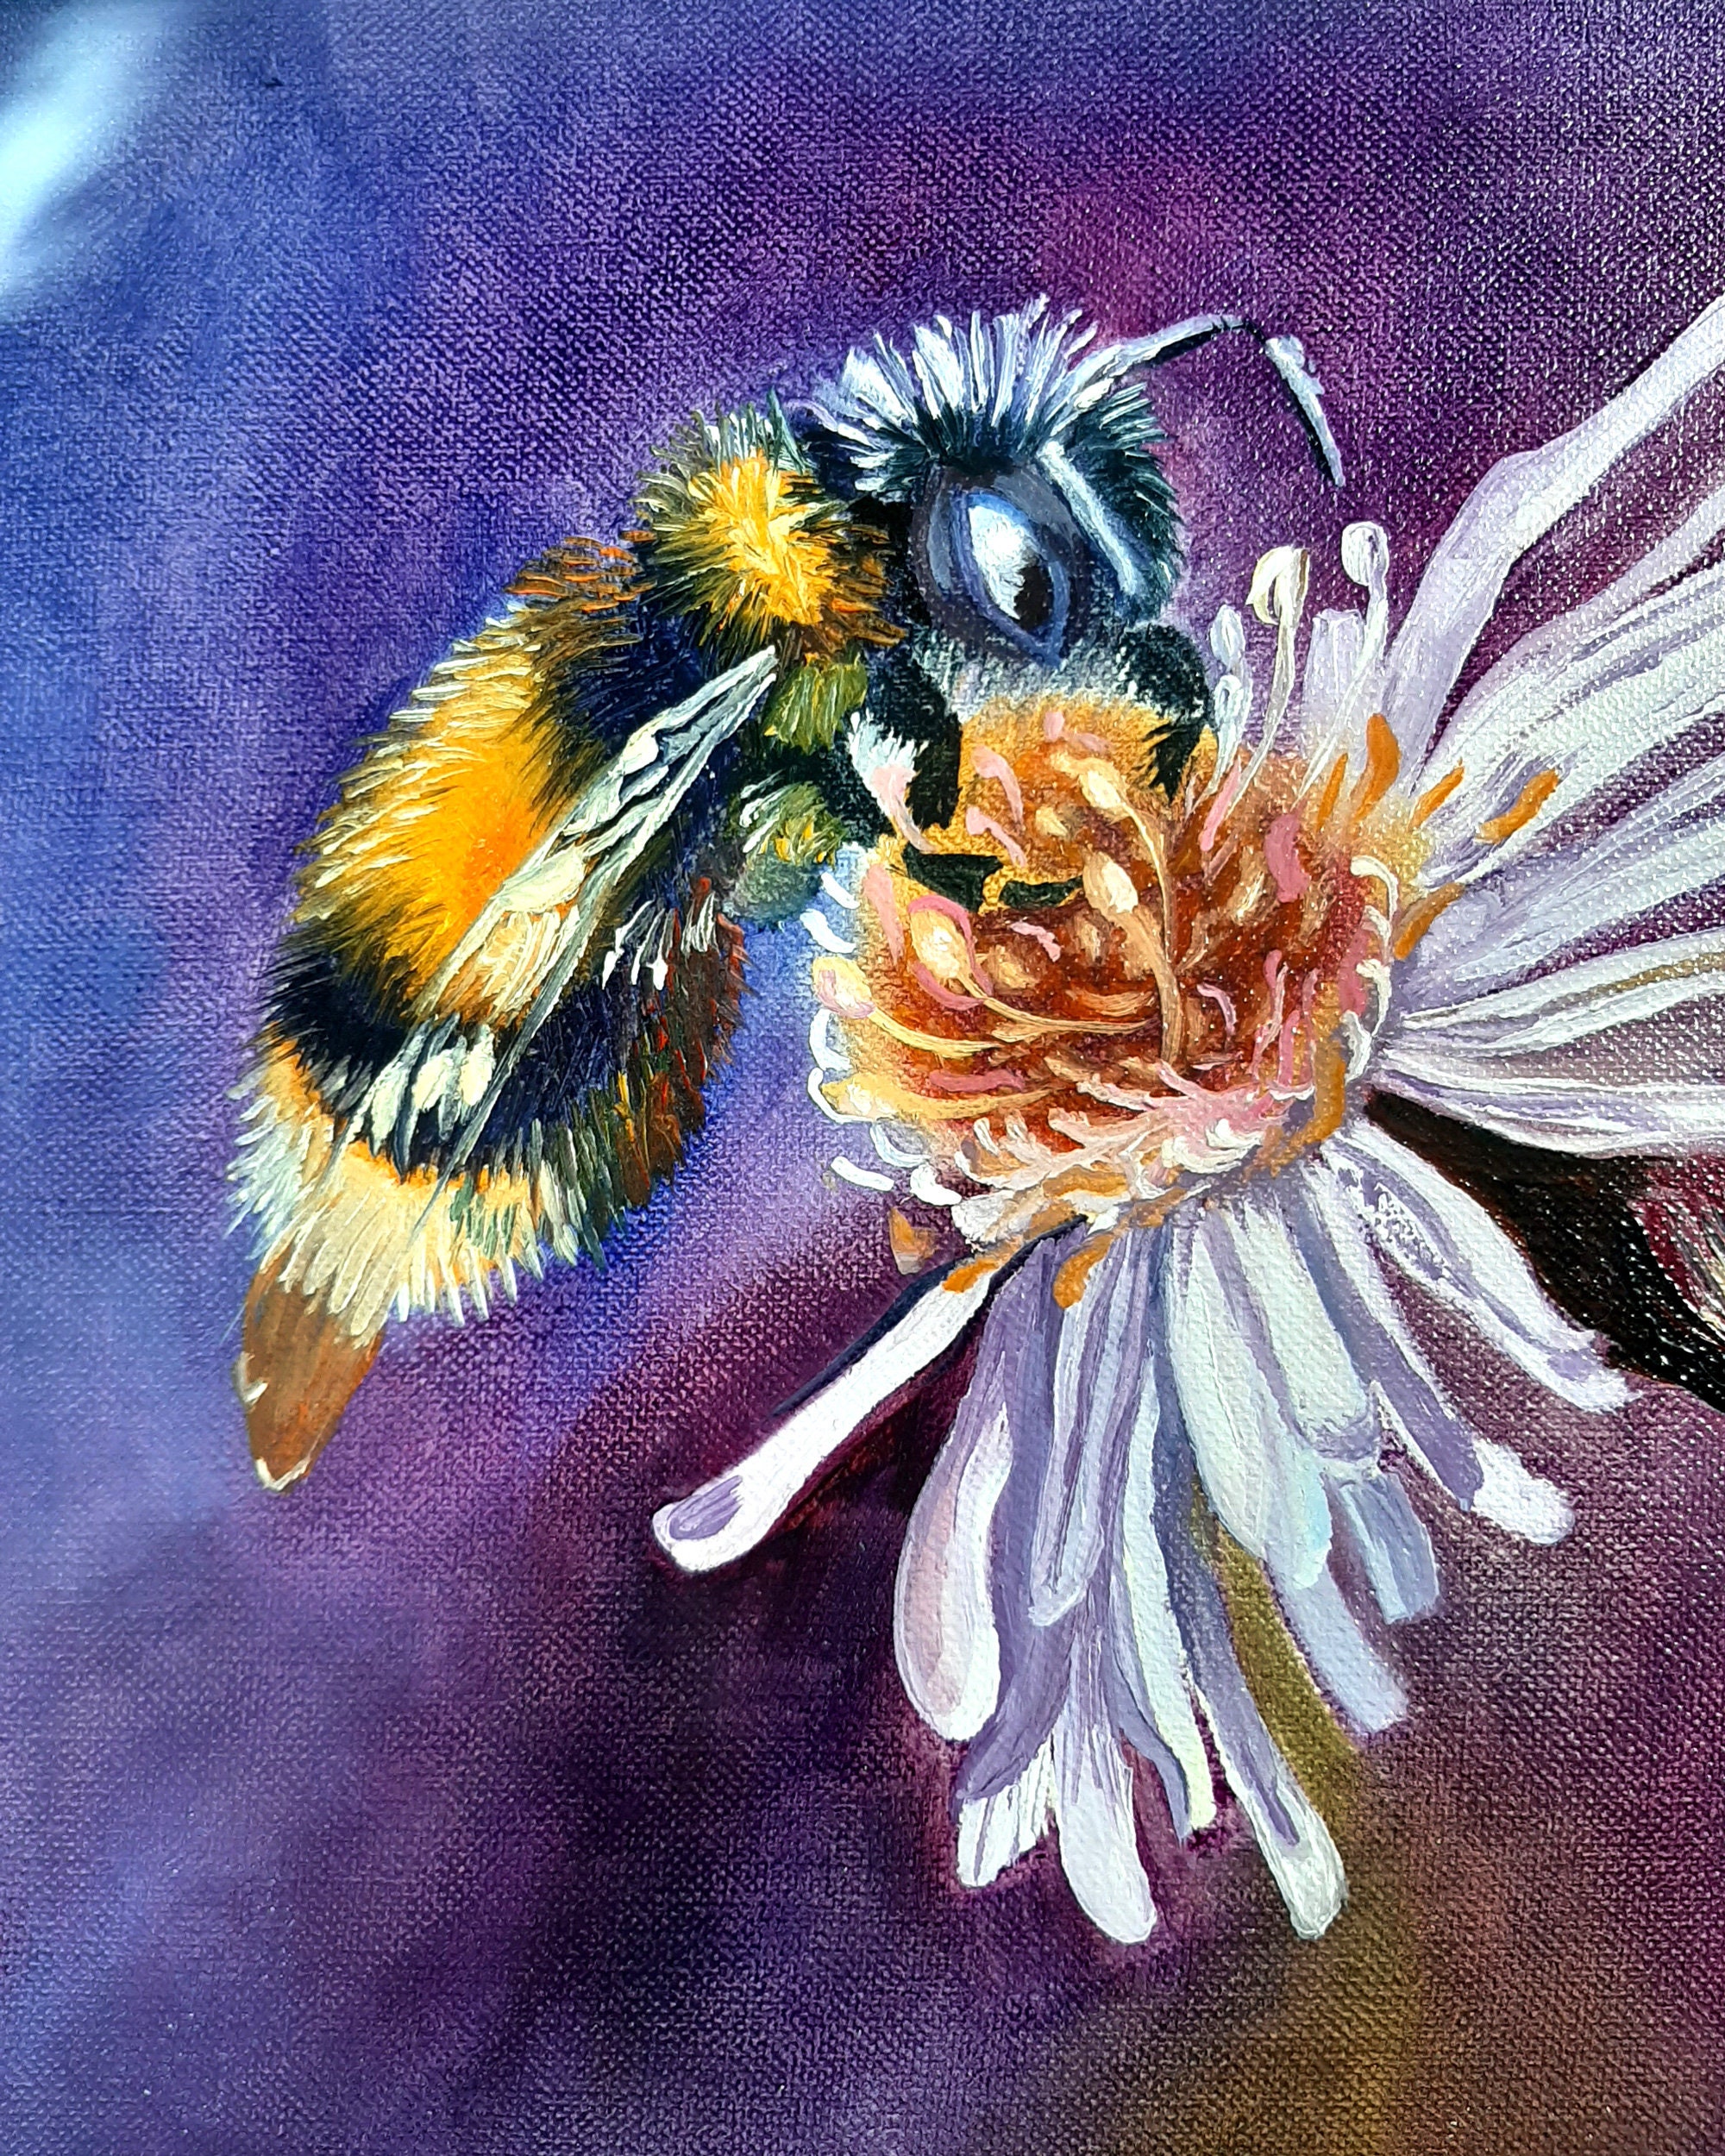 Bumblebee Painting Original Art Insect Flower Artwork Oil | Etsy